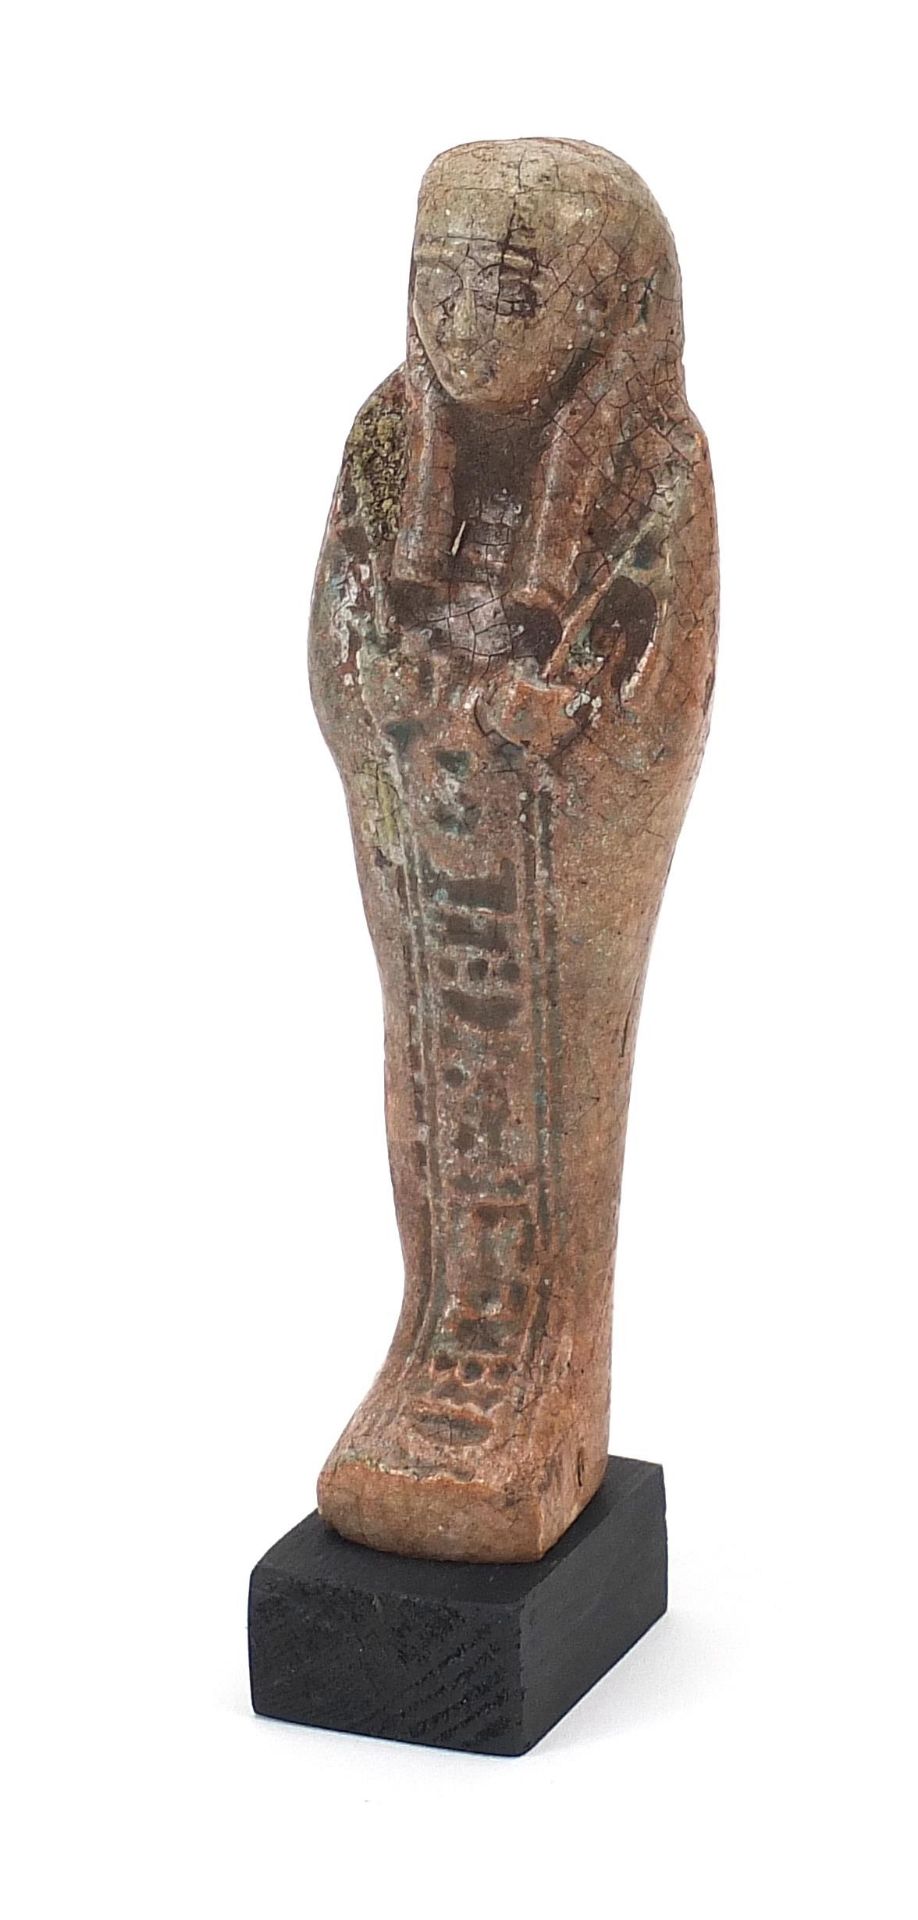 Egyptian style ushabti raised on a wooden base, overall 19cm high